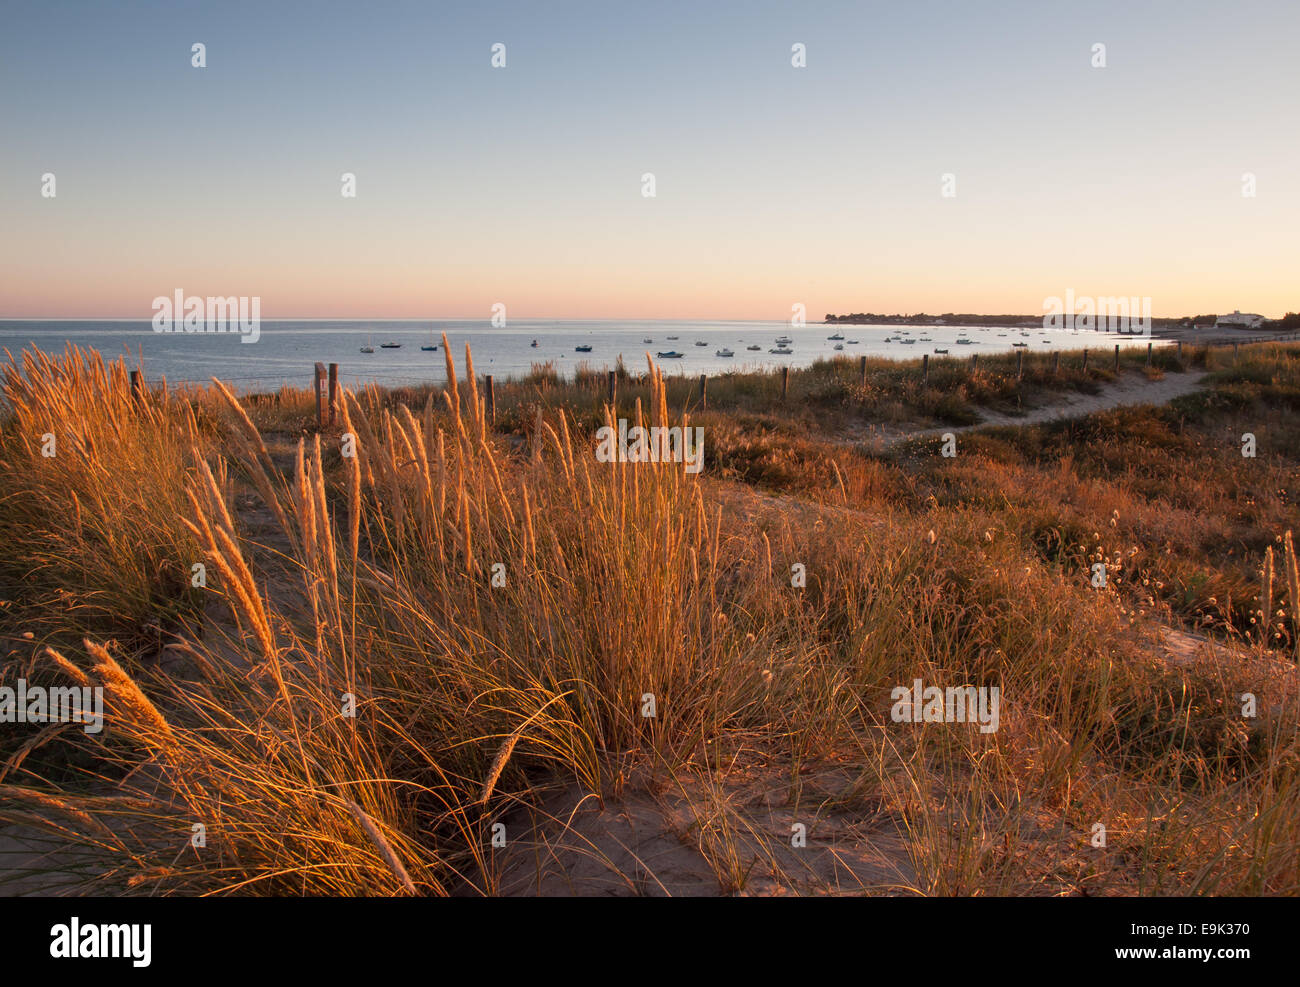 beach and coastal dunes viewed in soft evening light on the french atlantic coast noirmoutier Stock Photo